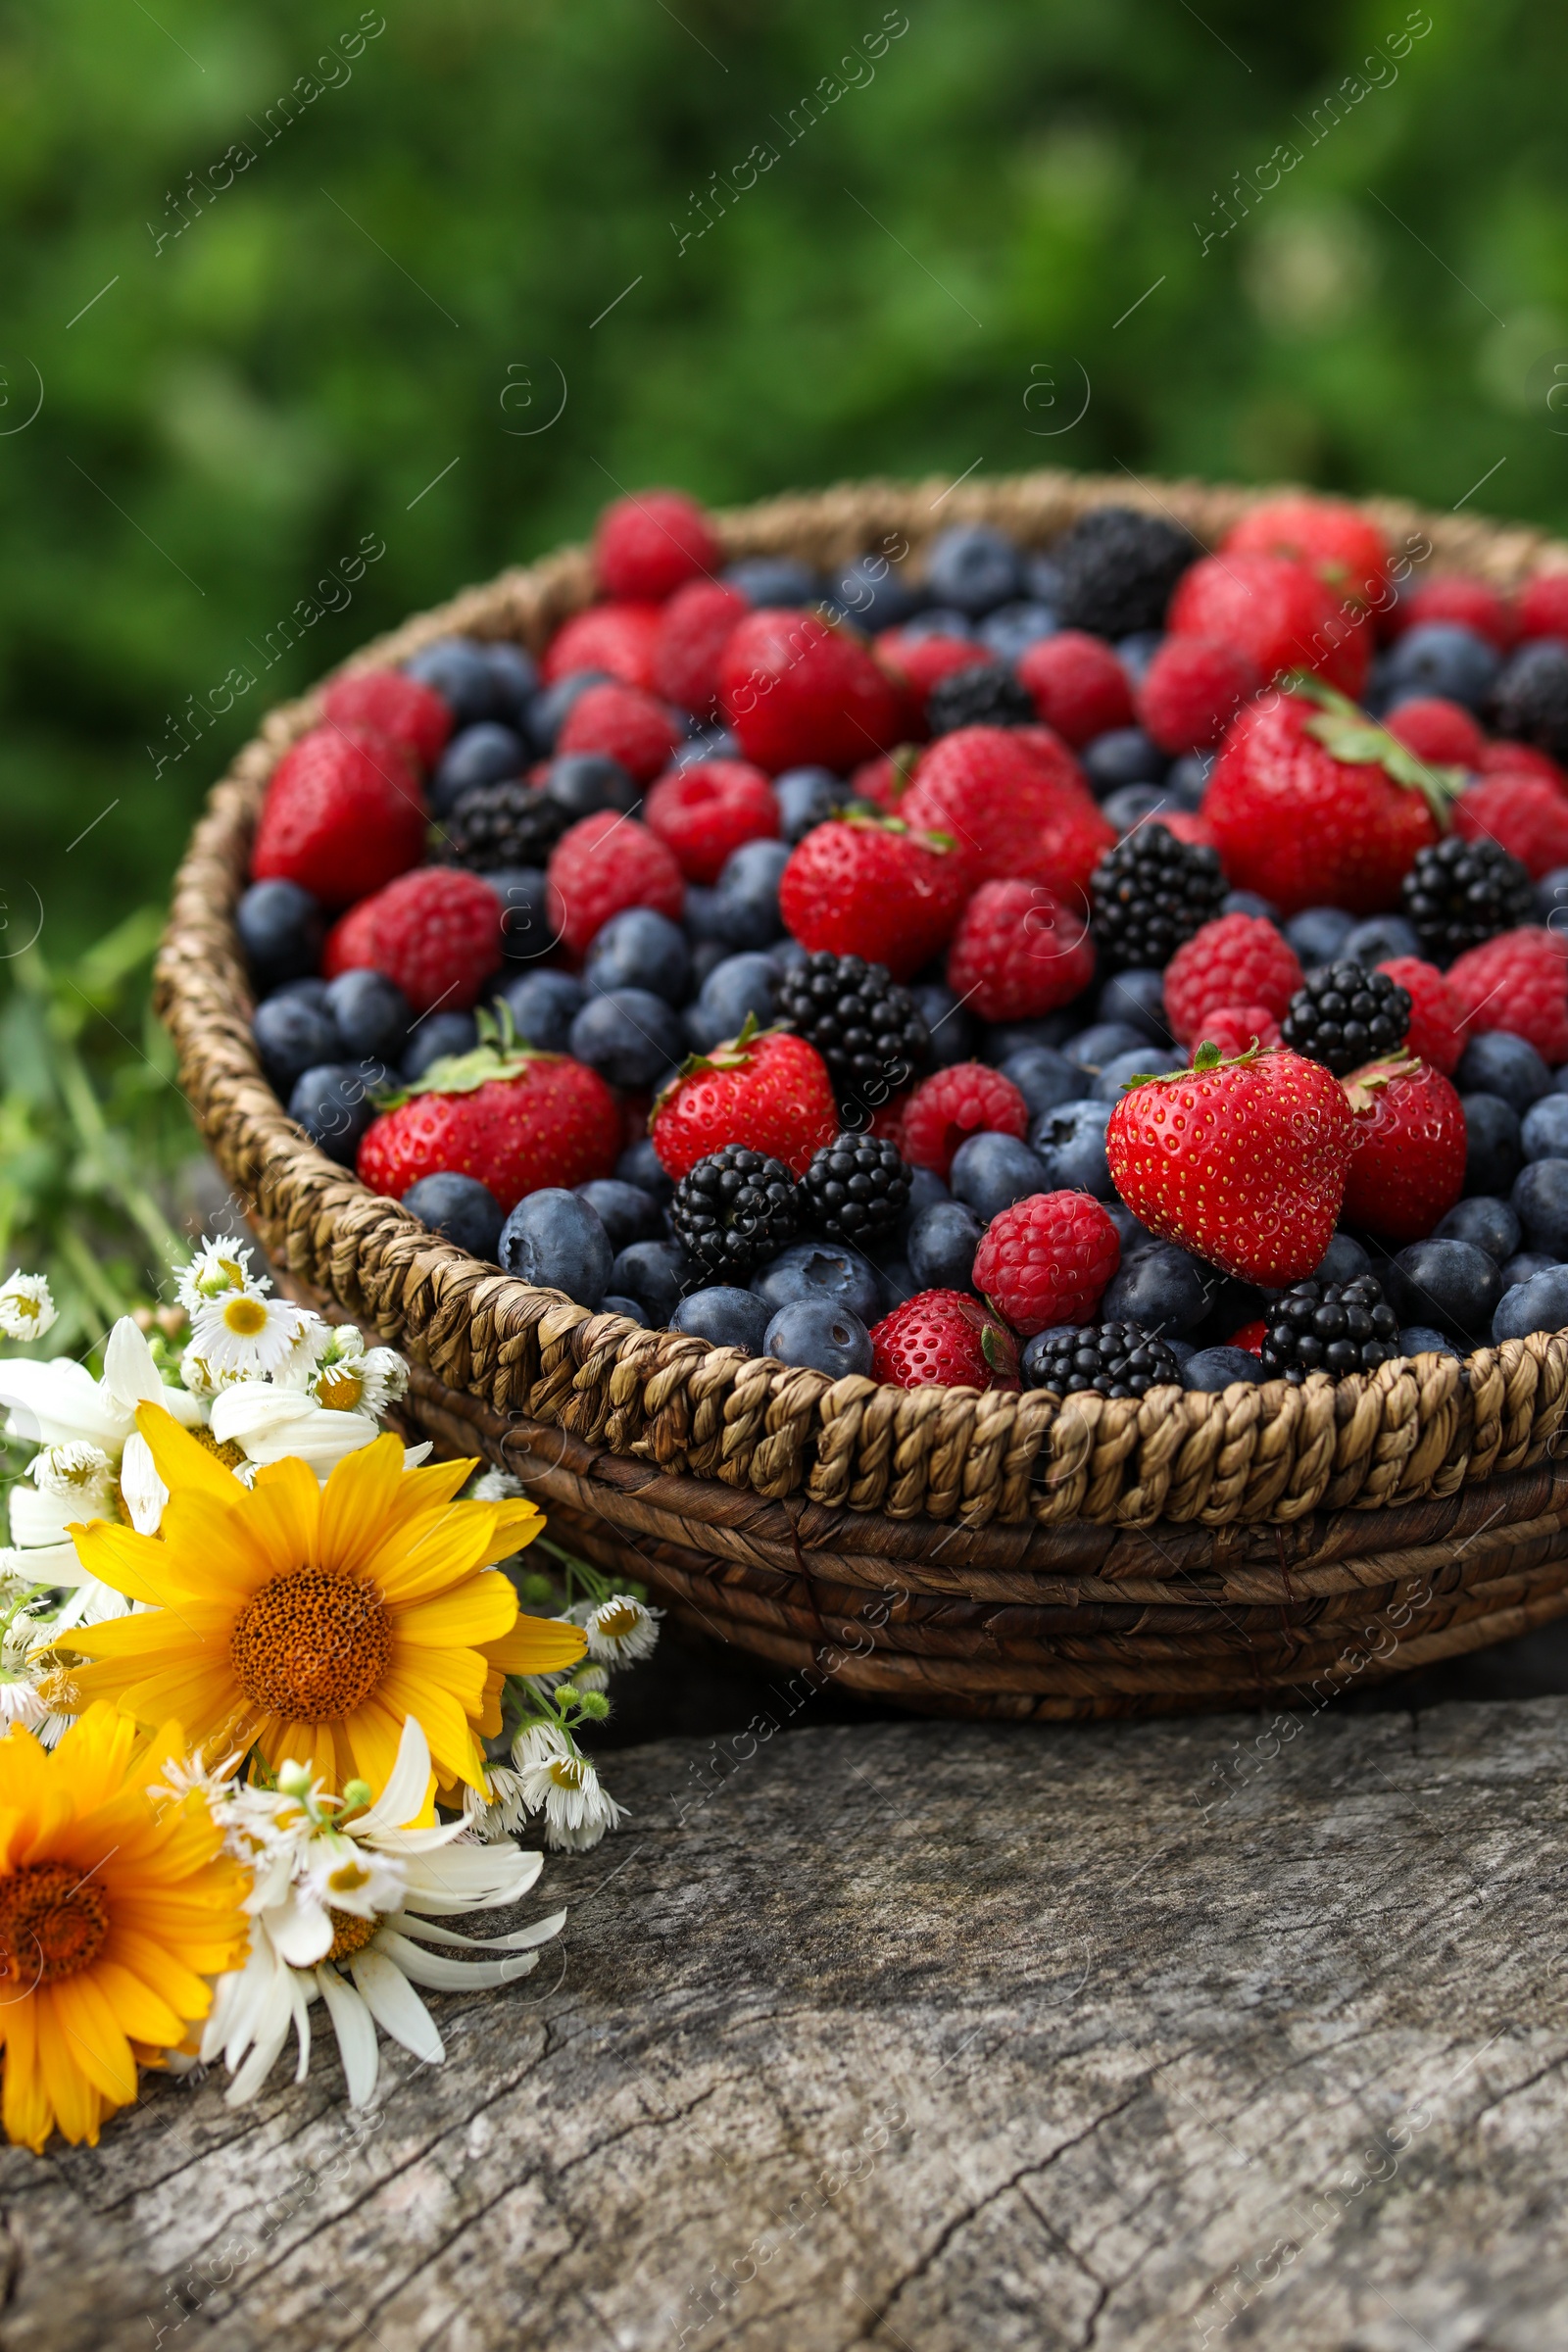 Photo of Wicker bowl with different fresh ripe berries and beautiful flowers on wooden surface outdoors